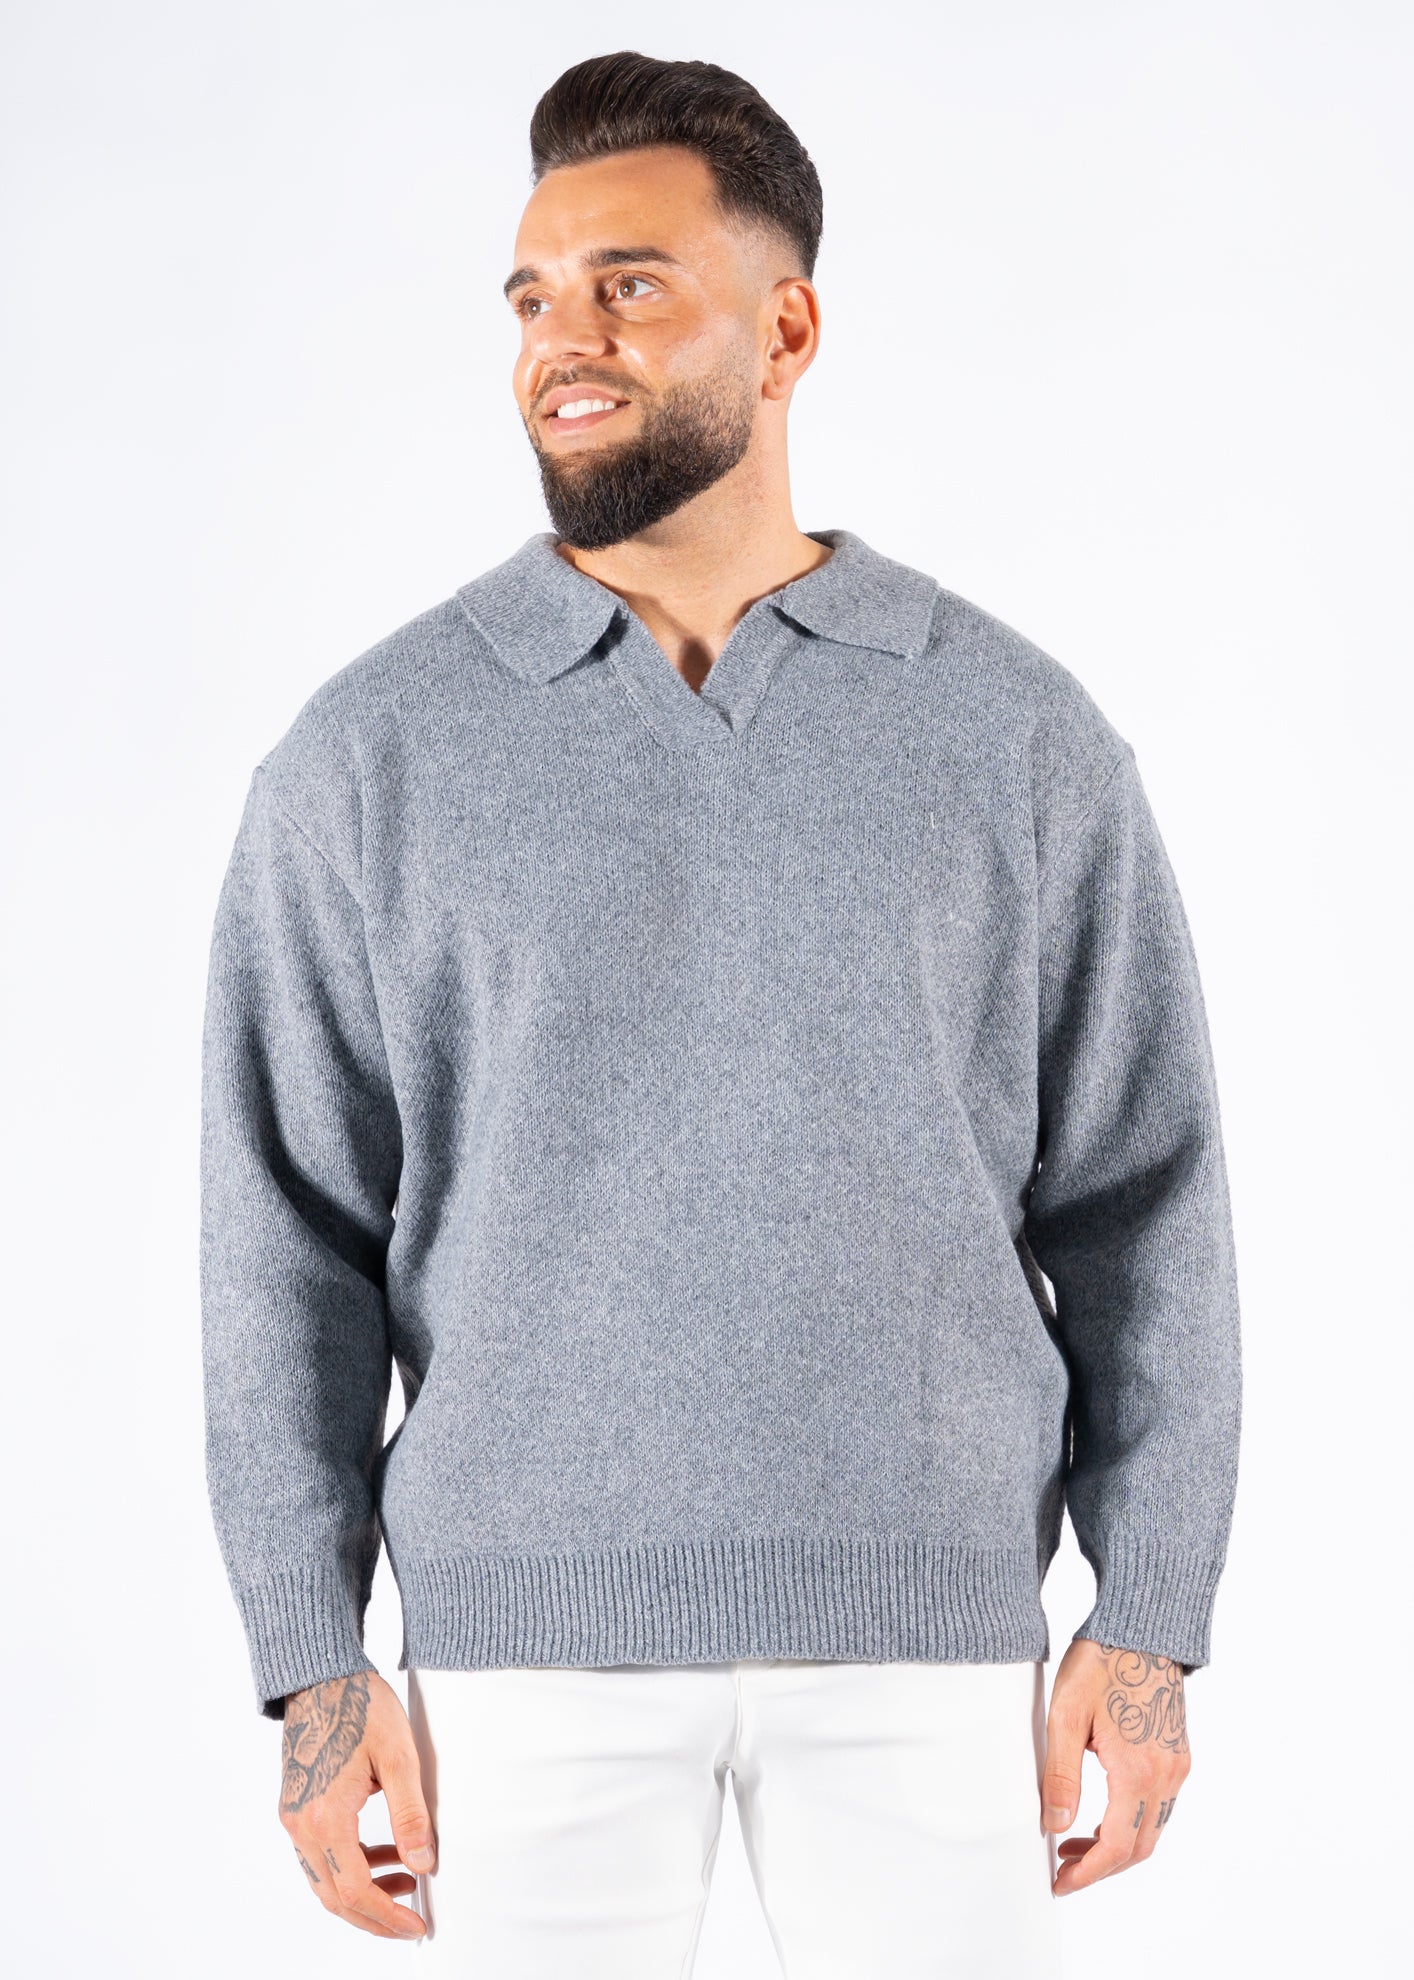 Sweater polo knitted grey oversized